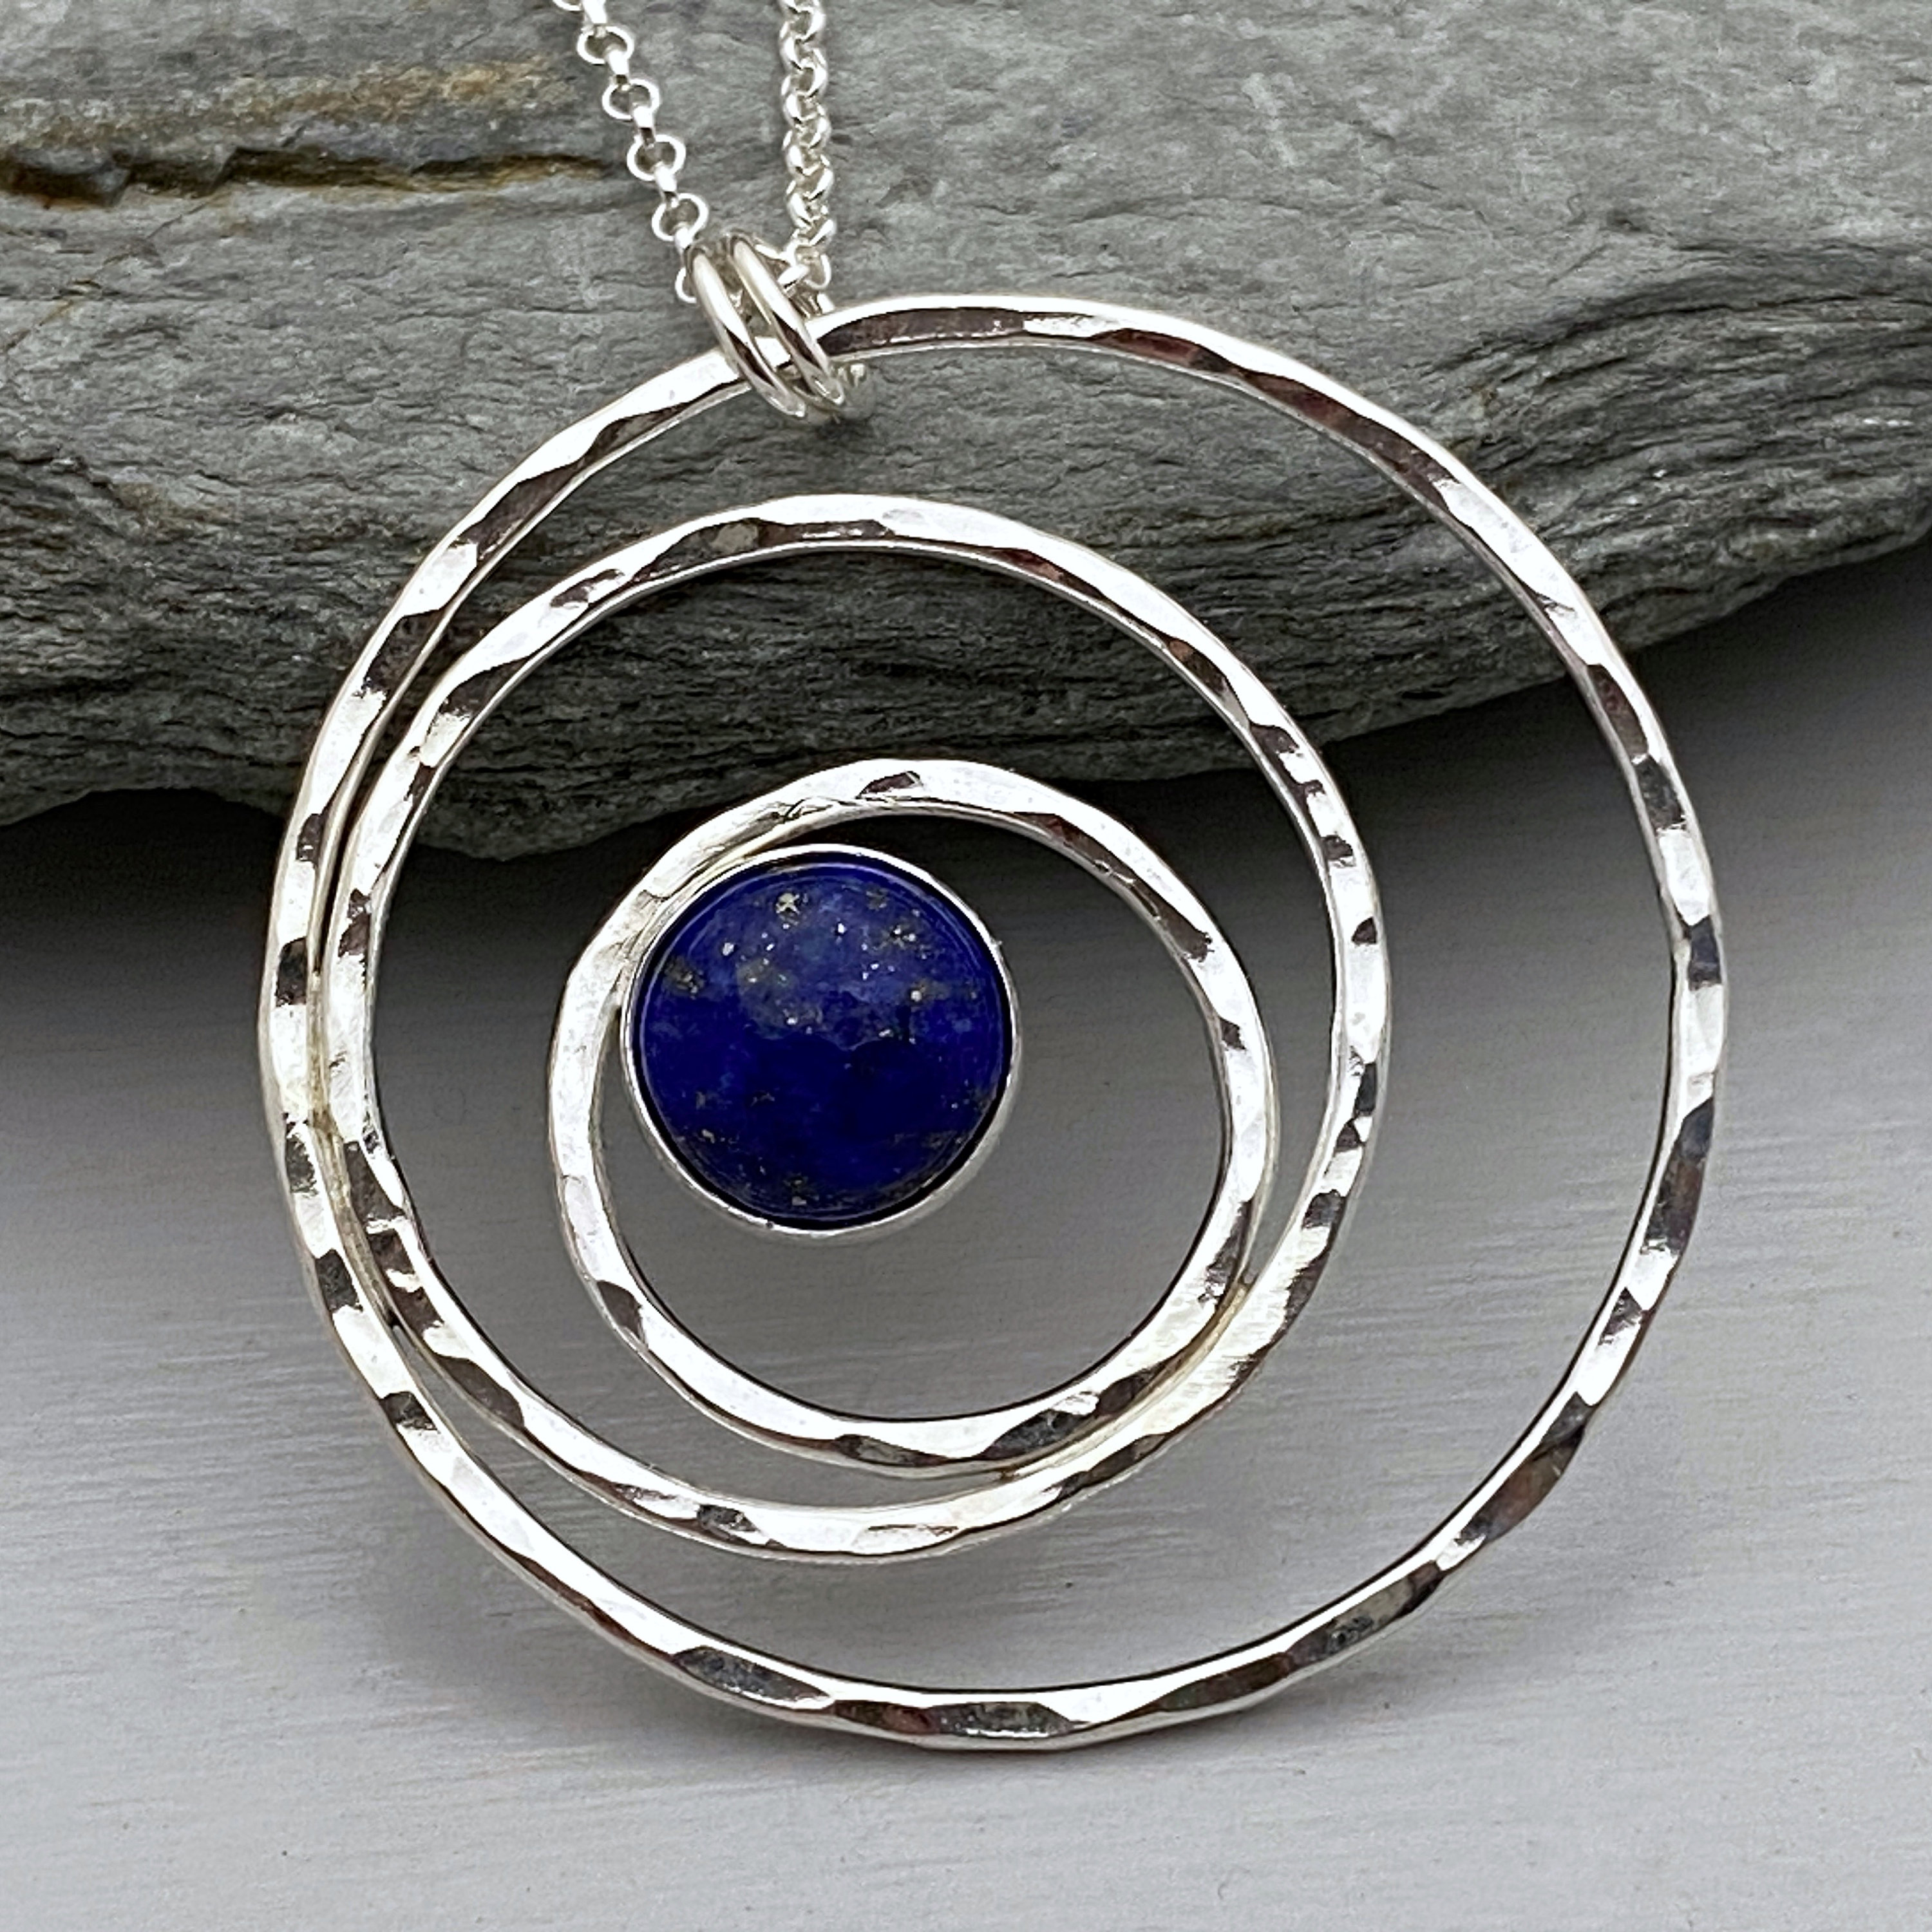 Silver Circles Pendant With Blue Lapis Lazuli Gemstone, Hammered Silver On Chain, Necklace